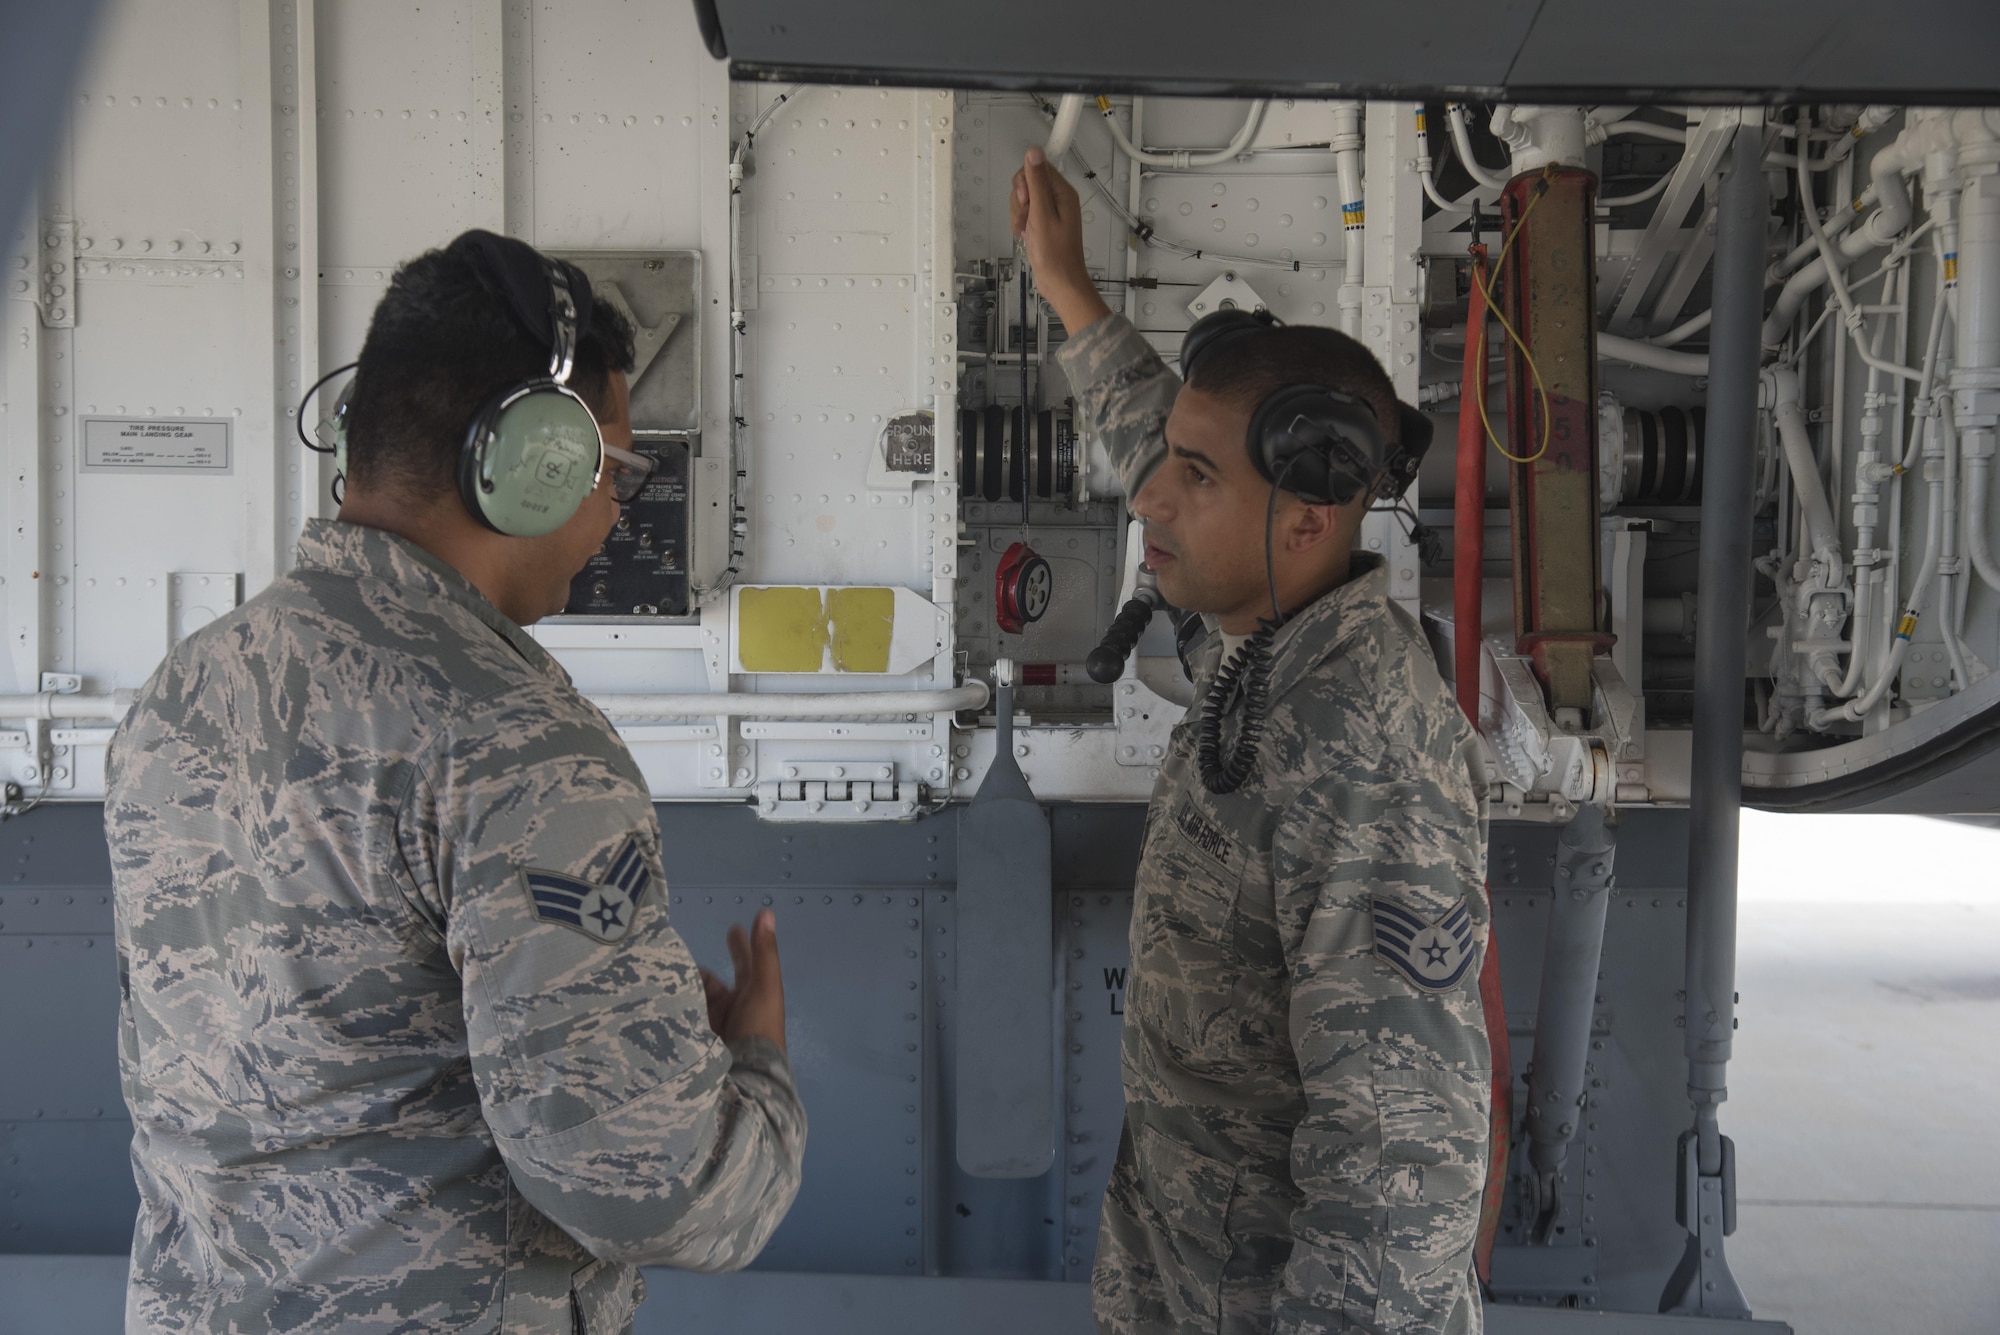 Senior Airman Jonathan Palascios-Conde, crew chief (left), discuss proper procedures for refueling with Staff Sergeant Jonathan Carmona, crew chief (right), while refueling a KC-135 on the 108th Wing tarmac at Joint Base McGuire-Dix-Lakehurst, N.J. Sept. 20, 2017. (U.S. Air National Guard photo by Staff Sgt. Ross A. Whitley/Released)